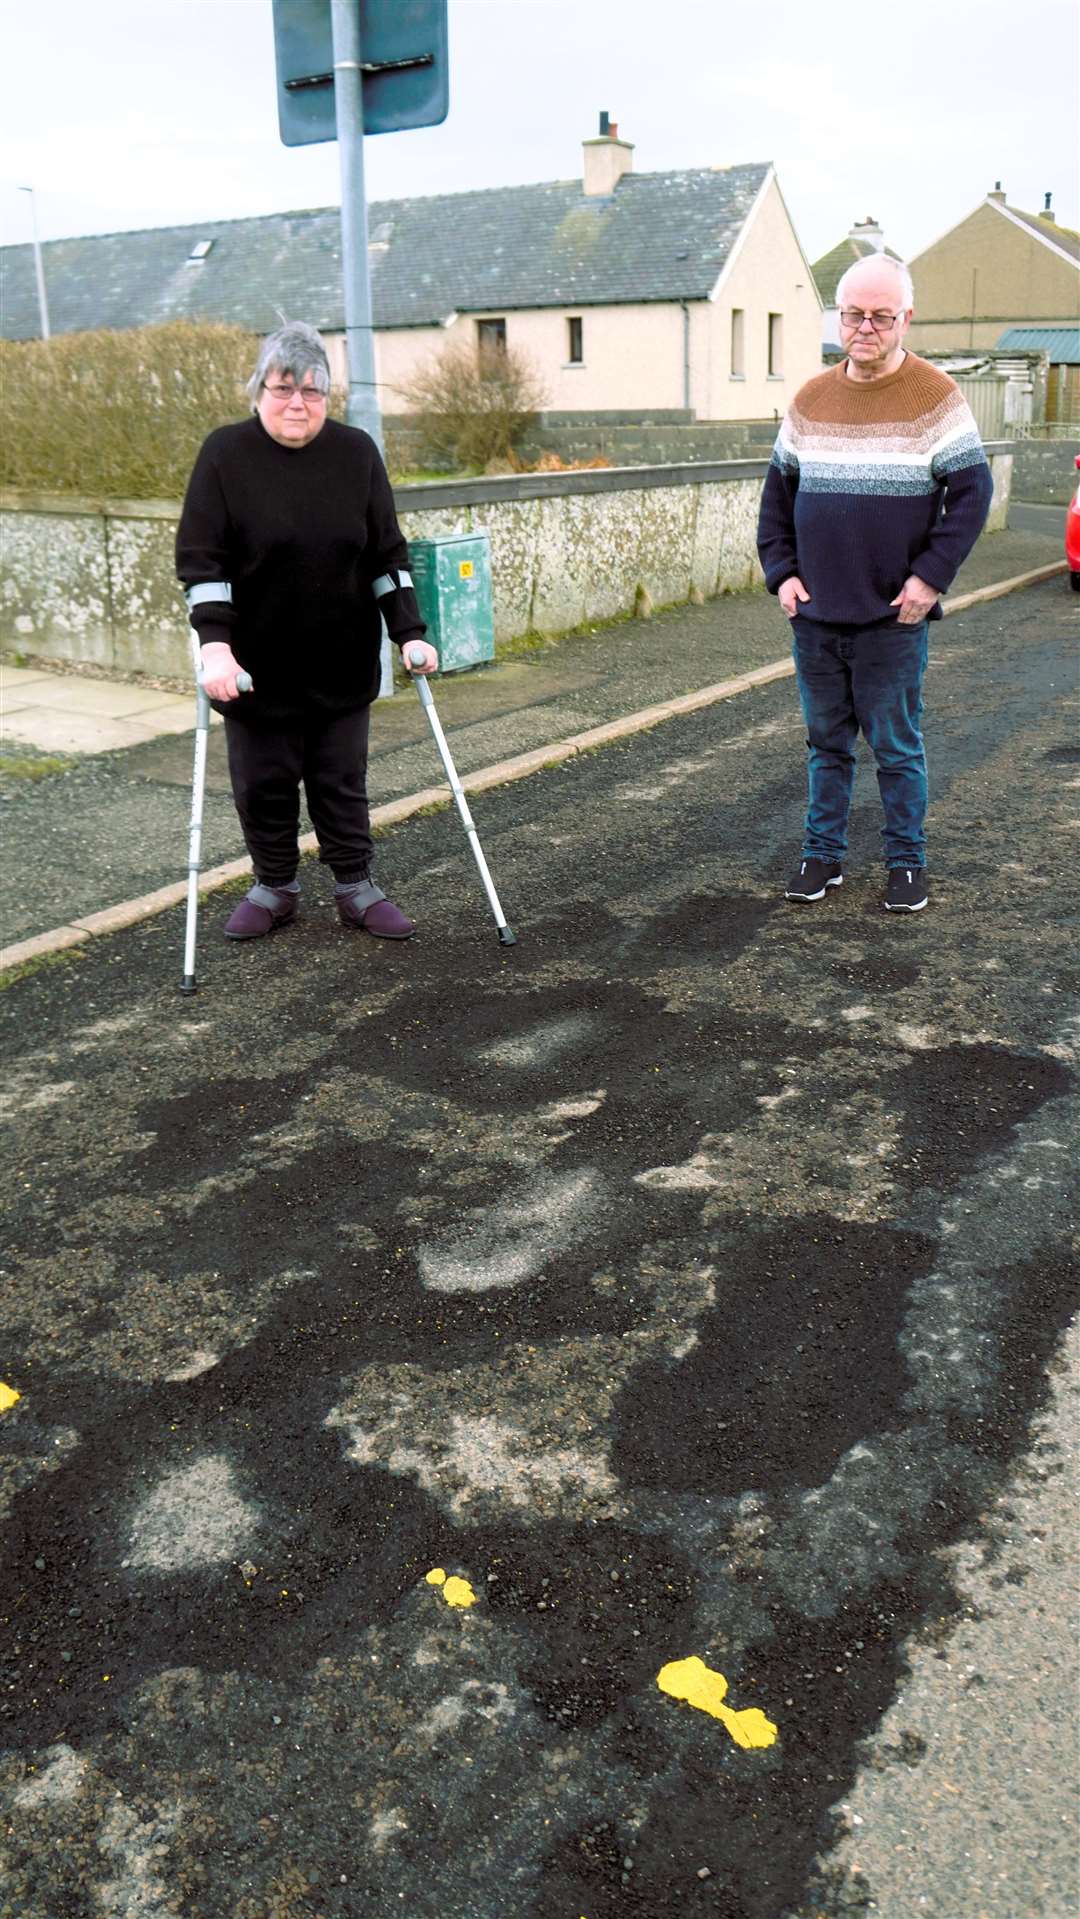 Lynne Hook worries she will stumble in the potholes on the crumbling road surface outside her home in Keiss. Picture: DGS